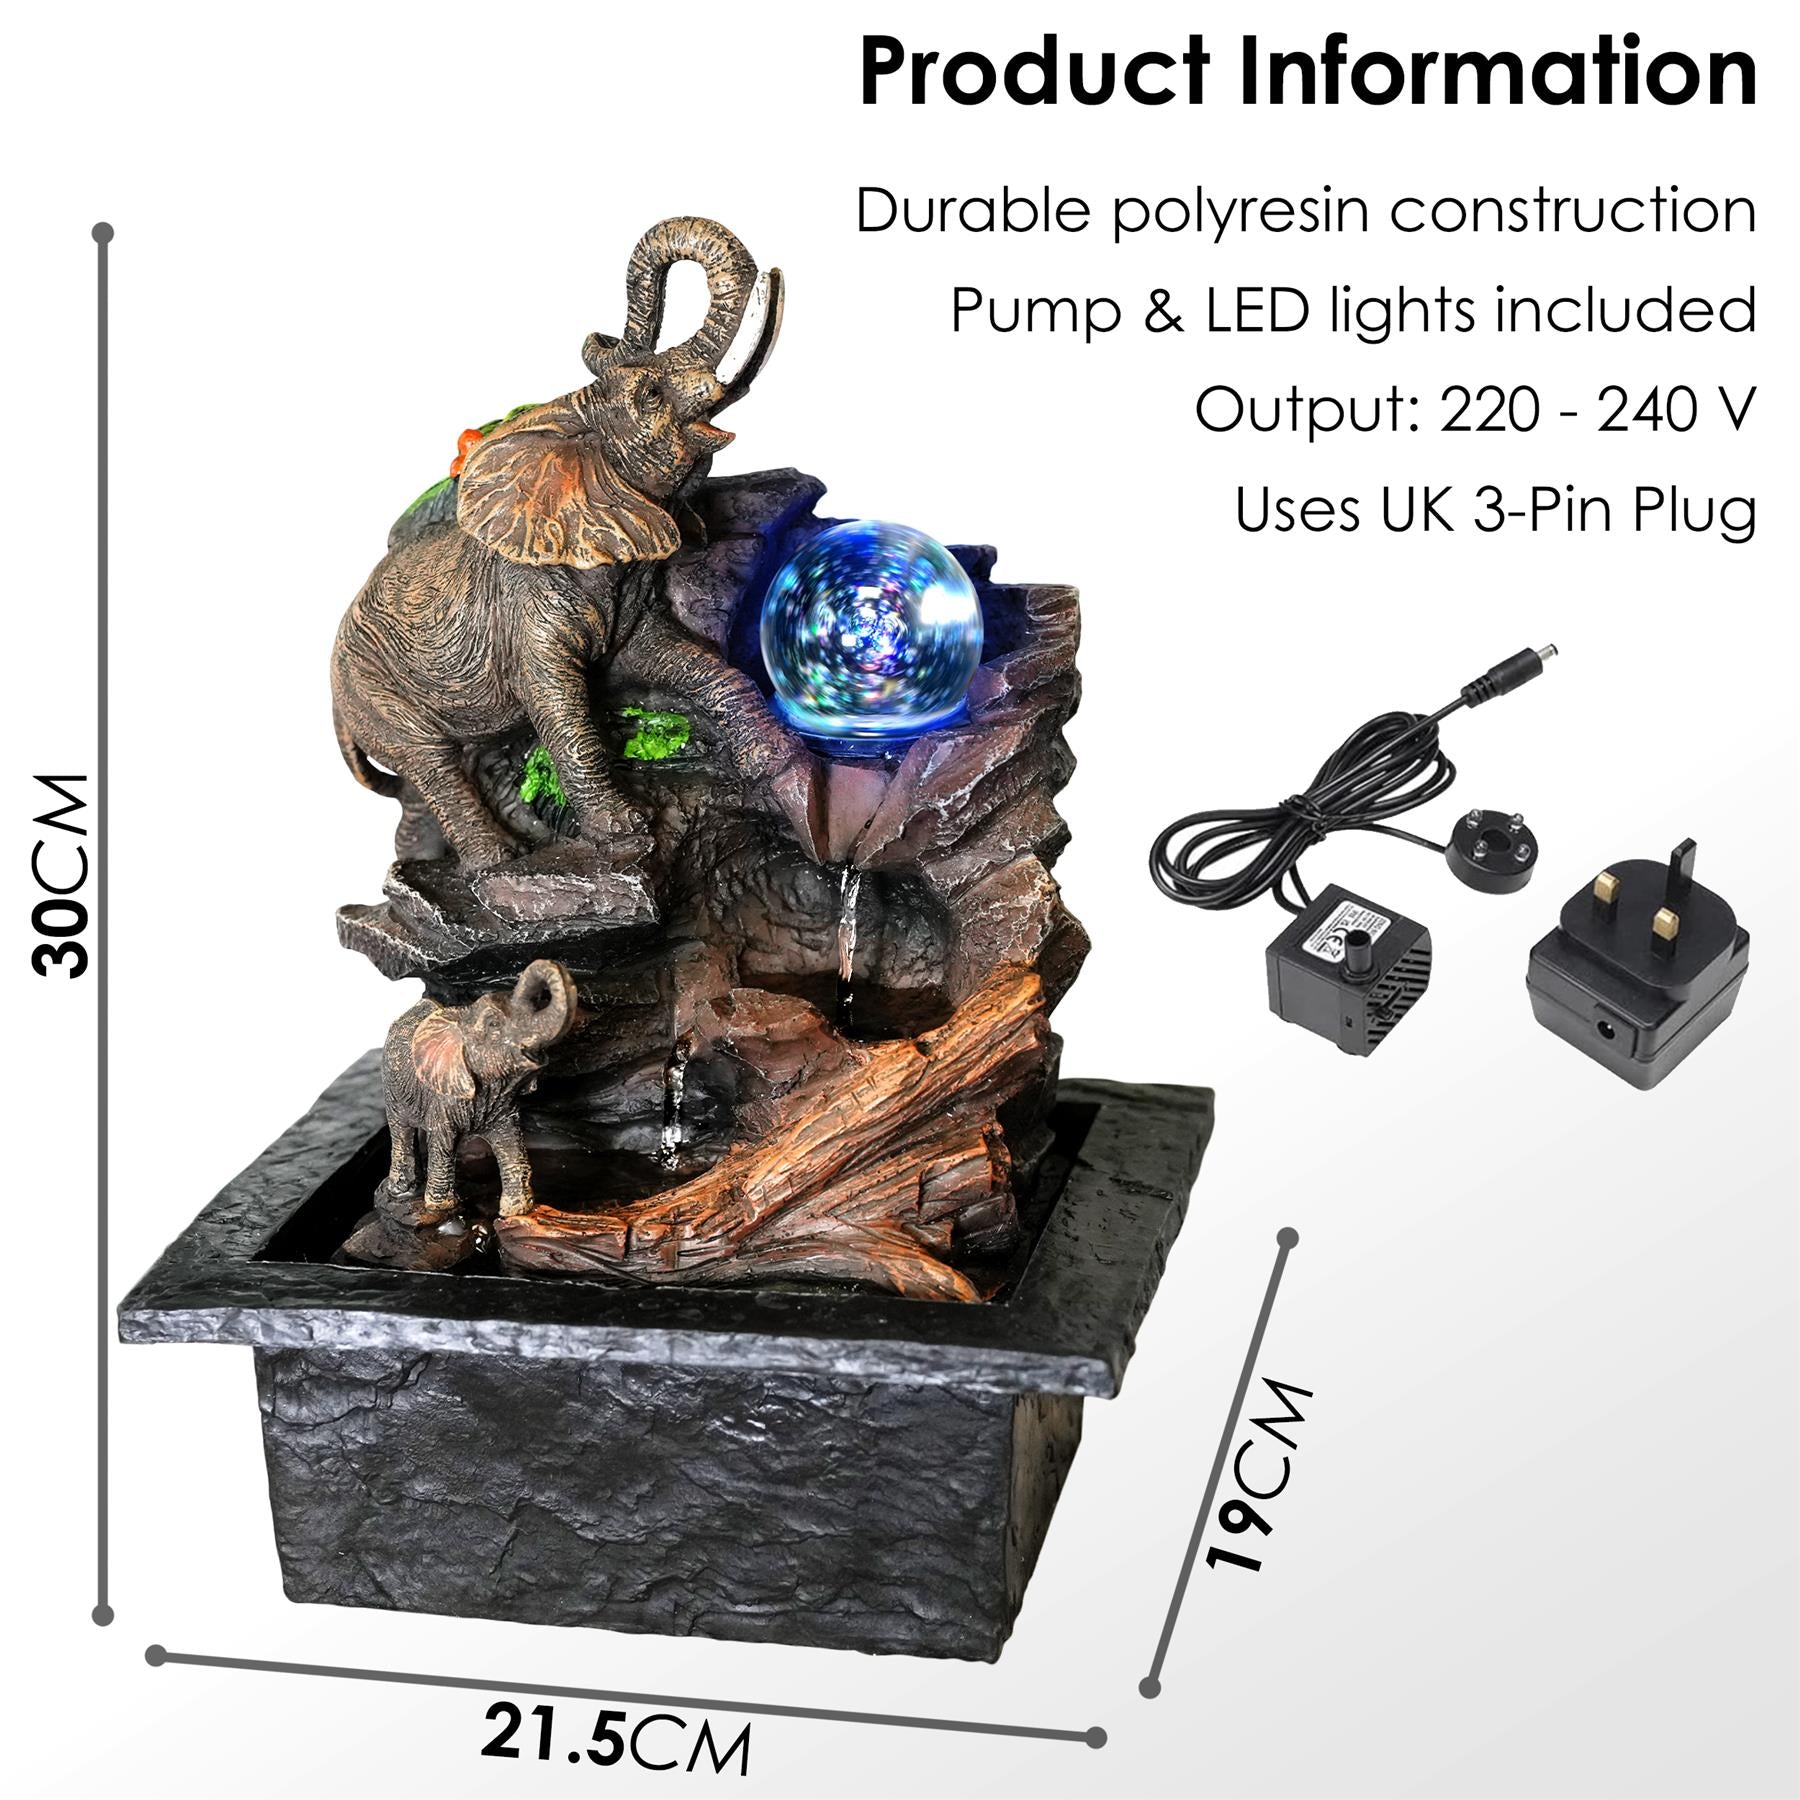 Elephant Water Feature Led Lights by GEEZY - UKBuyZone